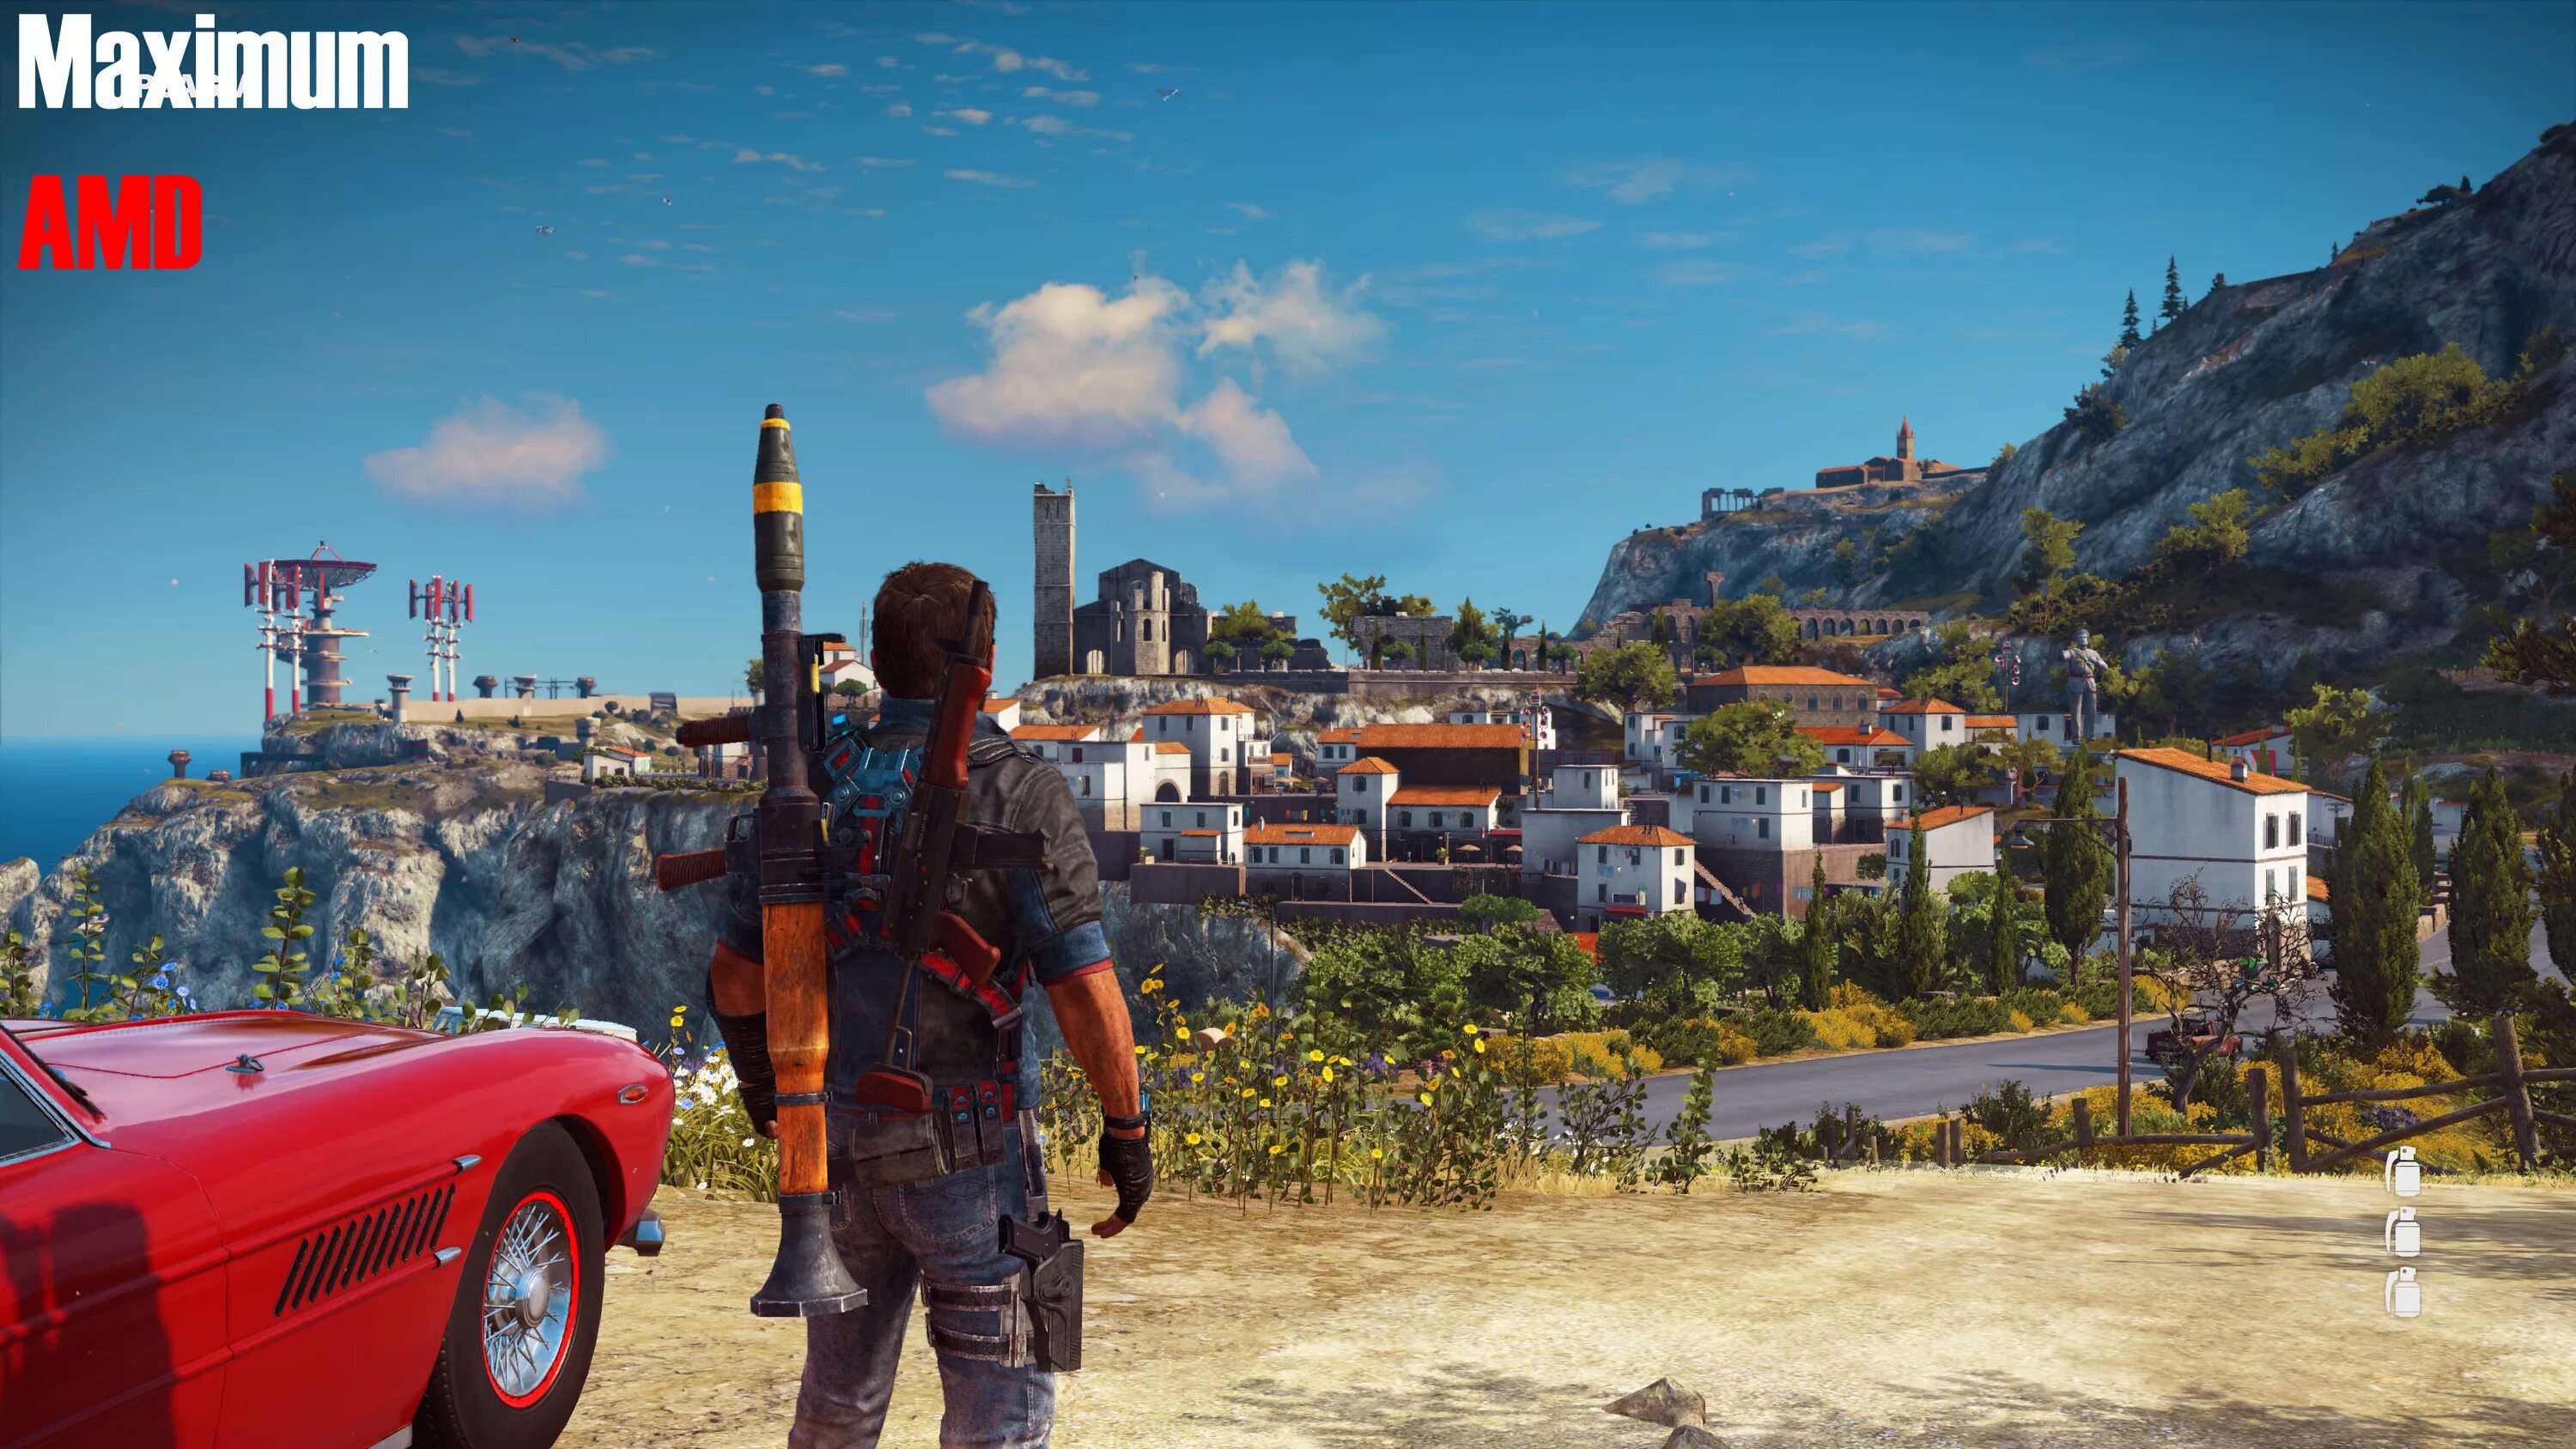 Release cause. Игра just cause 3. Just cause 3 на Икс бокс 360. Just cause 3 города. Джаст каус 1.